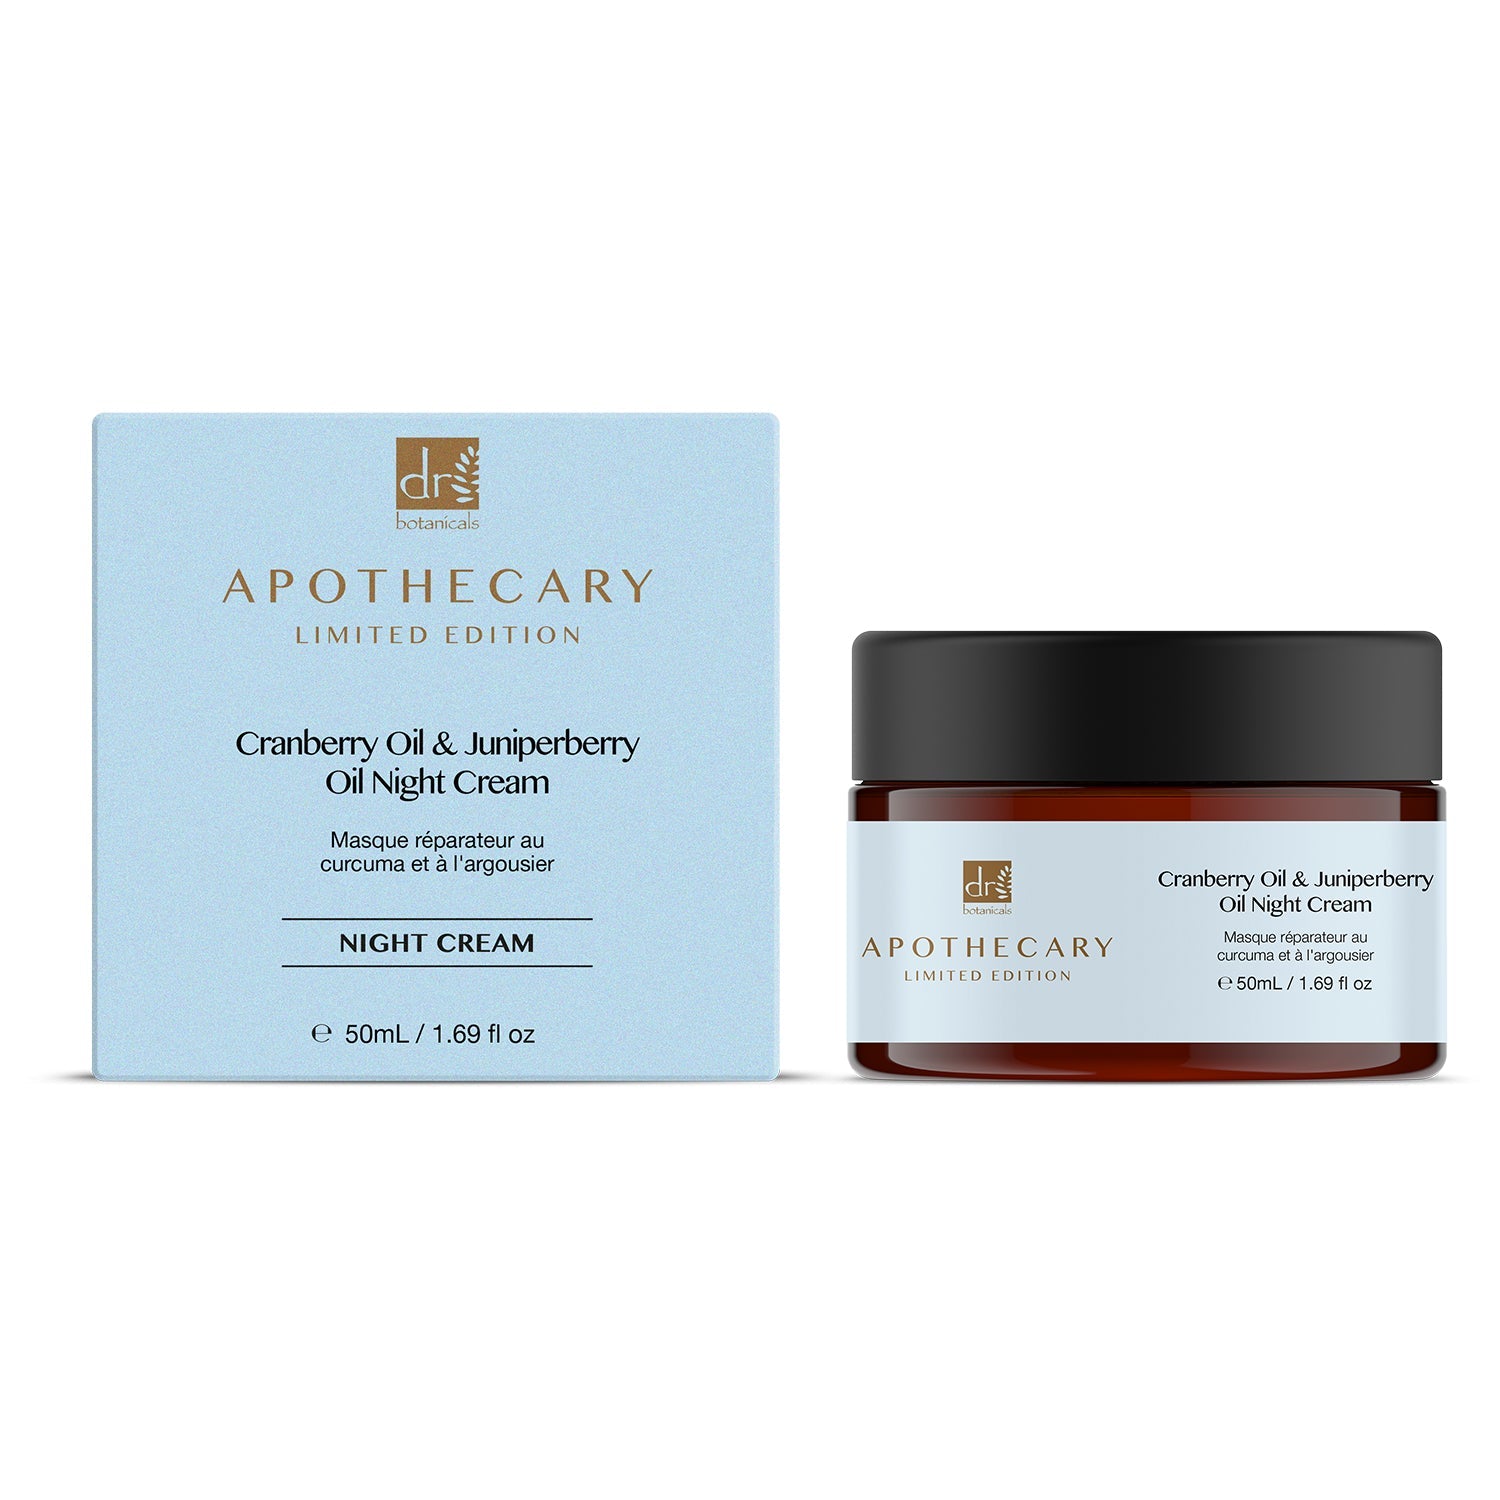 Cranberry Oil and Juniperberry Oil Night Cream + DB Charcoal and Zingy Fruits Mask Treatment